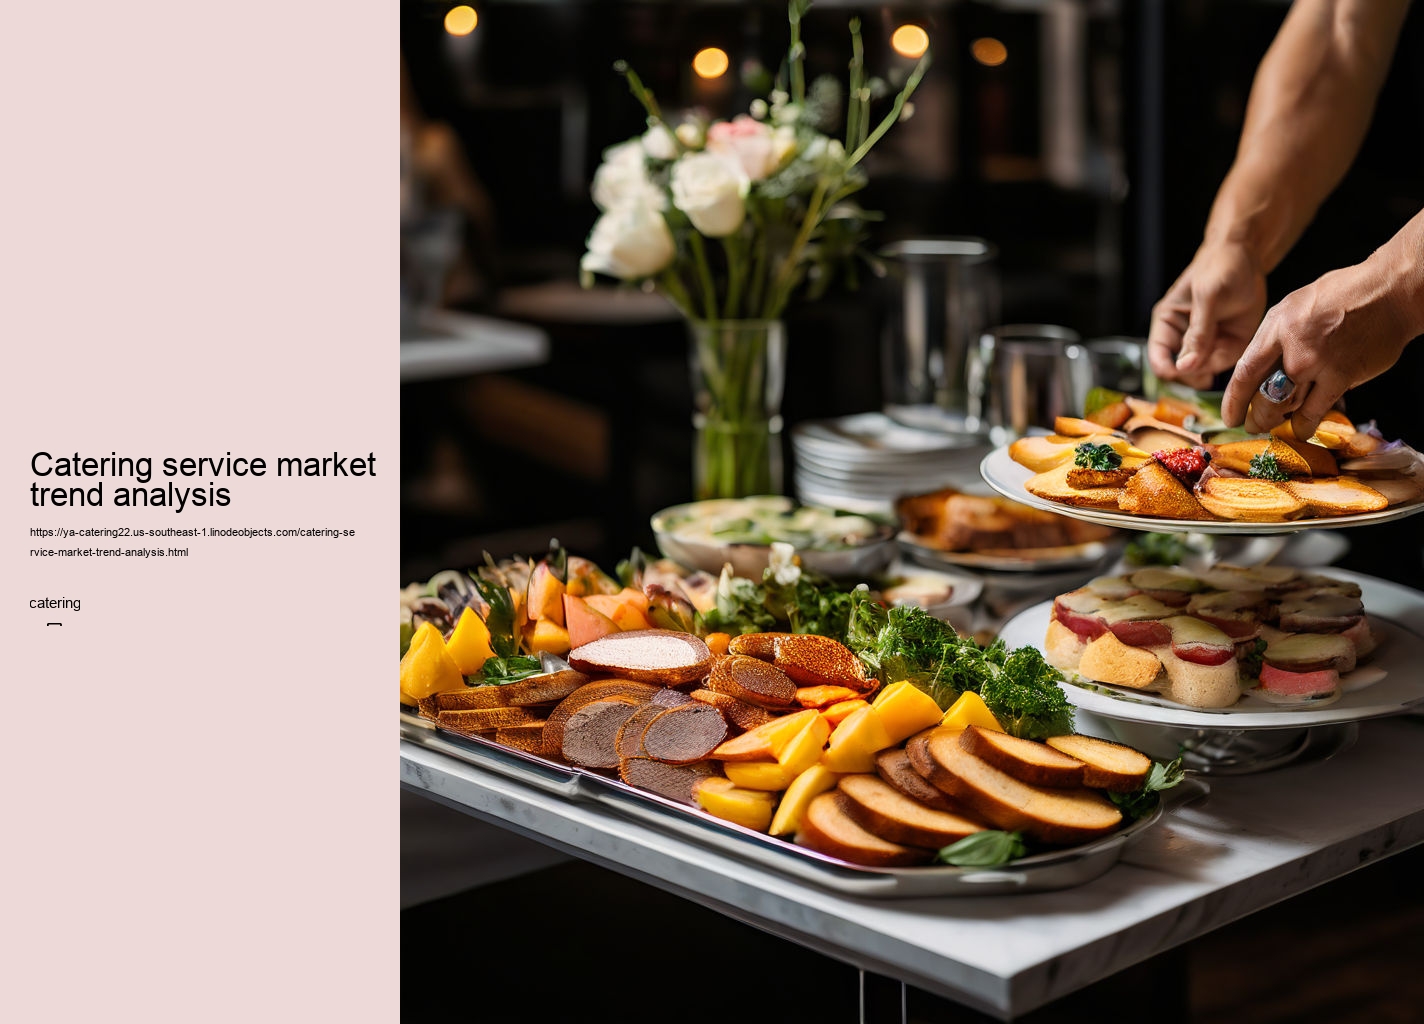 Catering service market trend analysis